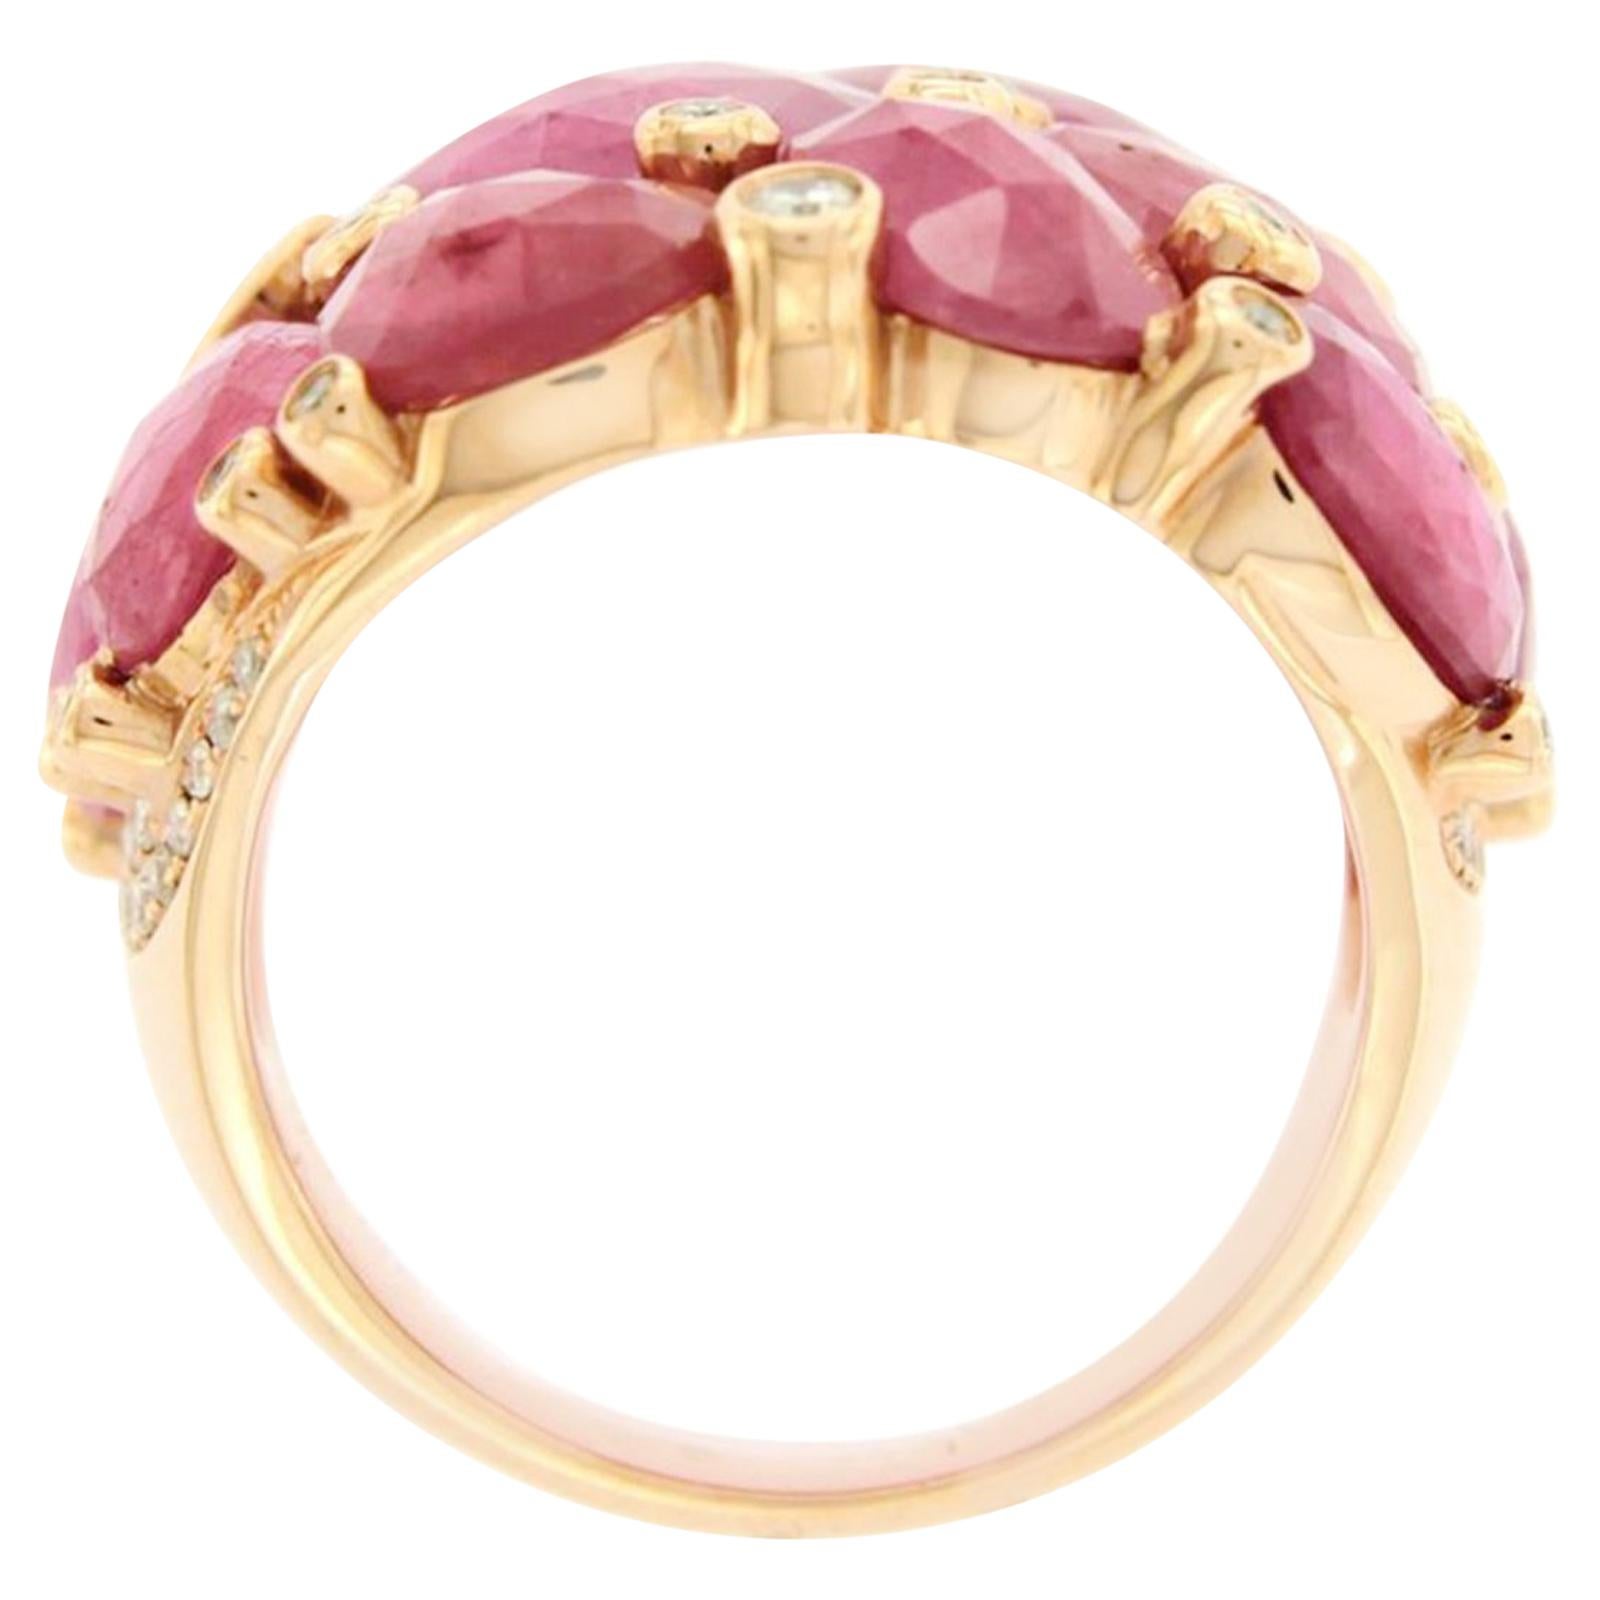 13.80 Ct Sliced Rose Cut Pink Sapphire & Diamonds In 14k Rose Gold Ring For Sale